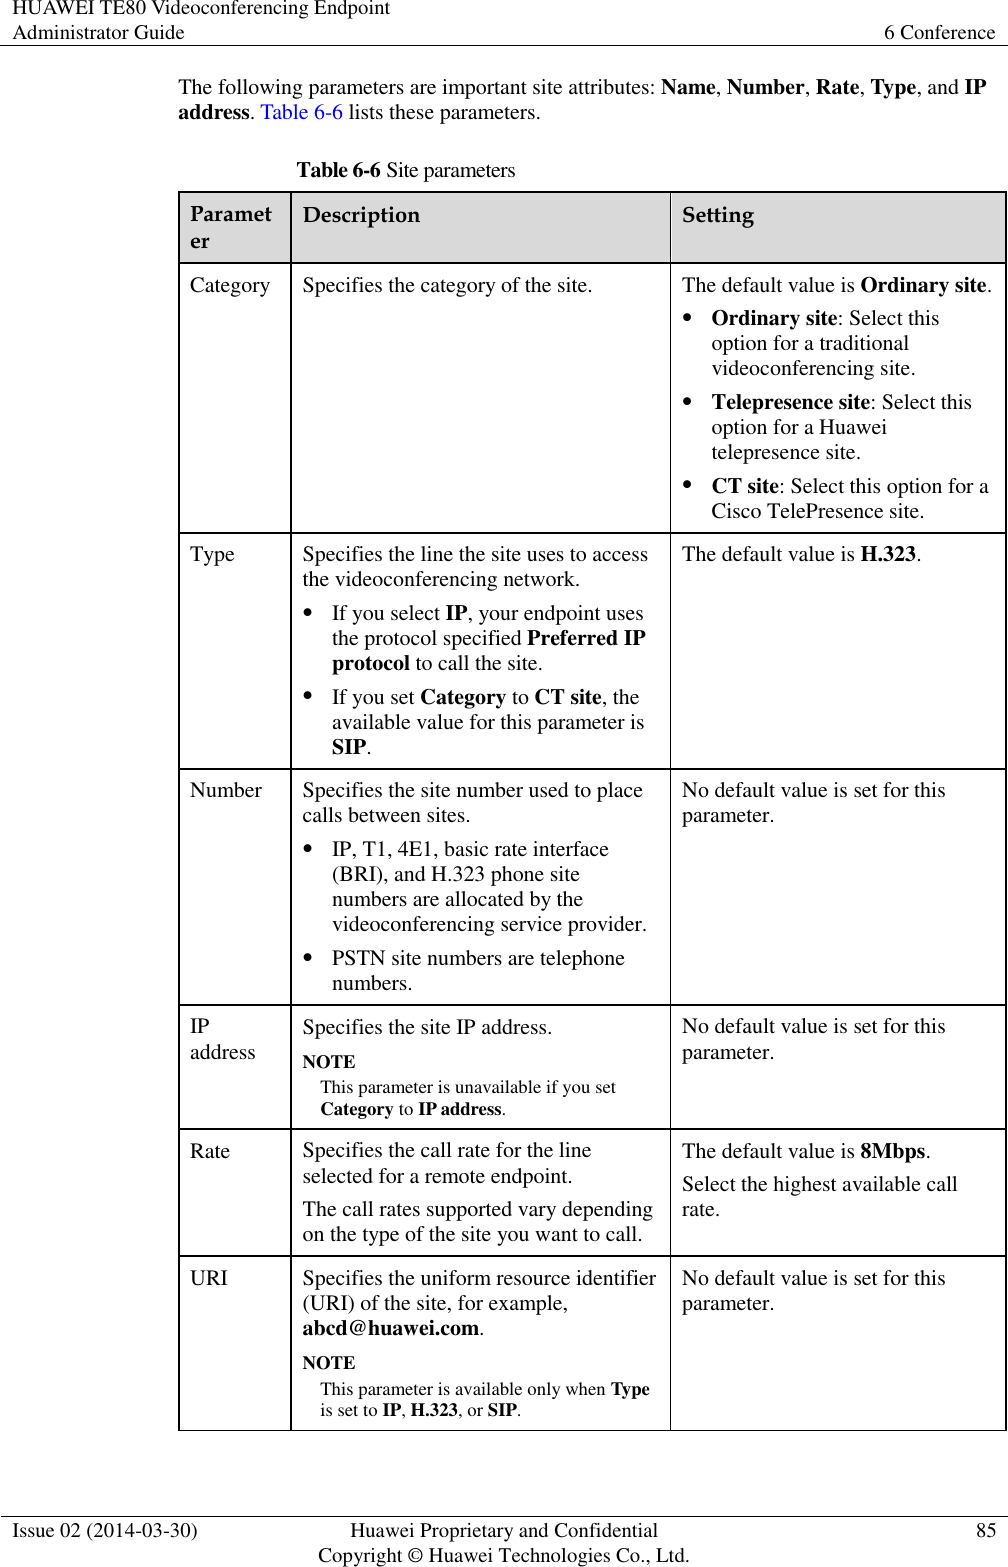 HUAWEI TE80 Videoconferencing Endpoint Administrator Guide 6 Conference  Issue 02 (2014-03-30) Huawei Proprietary and Confidential Copyright © Huawei Technologies Co., Ltd. 85  The following parameters are important site attributes: Name, Number, Rate, Type, and IP address. Table 6-6 lists these parameters. Table 6-6 Site parameters Parameter Description Setting Category Specifies the category of the site.   The default value is Ordinary site.  Ordinary site: Select this option for a traditional videoconferencing site.  Telepresence site: Select this option for a Huawei telepresence site.  CT site: Select this option for a Cisco TelePresence site. Type Specifies the line the site uses to access the videoconferencing network.  If you select IP, your endpoint uses the protocol specified Preferred IP protocol to call the site.  If you set Category to CT site, the available value for this parameter is SIP. The default value is H.323. Number Specifies the site number used to place calls between sites.  IP, T1, 4E1, basic rate interface (BRI), and H.323 phone site numbers are allocated by the videoconferencing service provider.  PSTN site numbers are telephone numbers. No default value is set for this parameter. IP address Specifies the site IP address. NOTE This parameter is unavailable if you set Category to IP address. No default value is set for this parameter. Rate Specifies the call rate for the line selected for a remote endpoint.   The call rates supported vary depending on the type of the site you want to call. The default value is 8Mbps.   Select the highest available call rate. URI Specifies the uniform resource identifier (URI) of the site, for example, abcd@huawei.com.   NOTE This parameter is available only when Type is set to IP, H.323, or SIP. No default value is set for this parameter.  